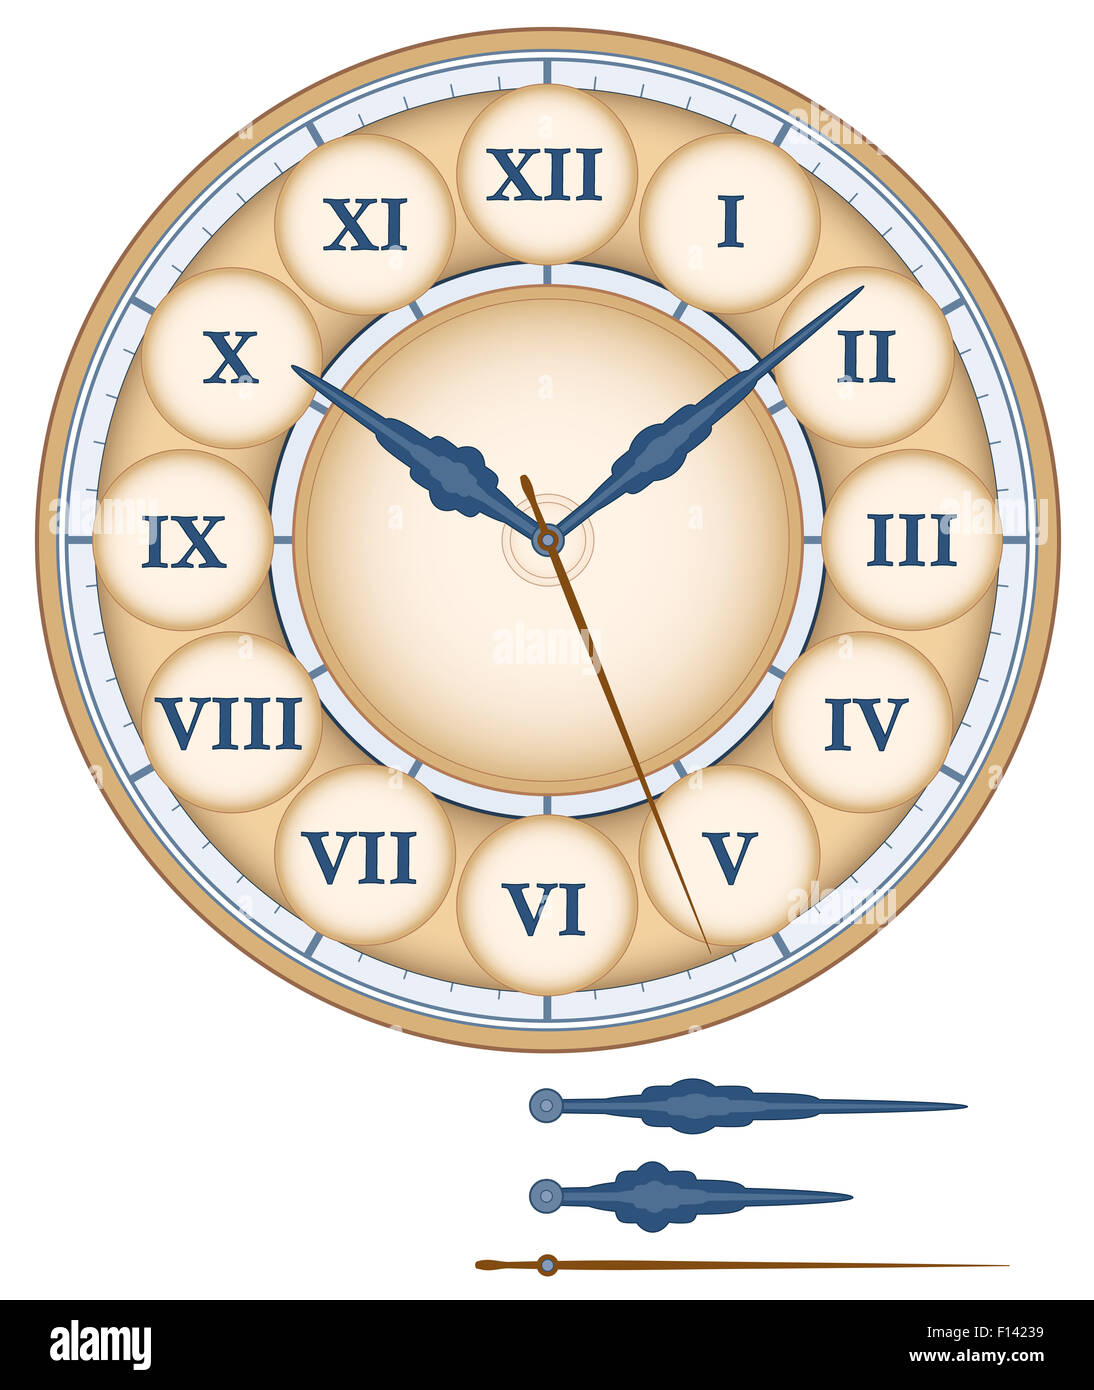 Clock face as part of an analog clock with roman numerals. Illustration on white background. Stock Photo